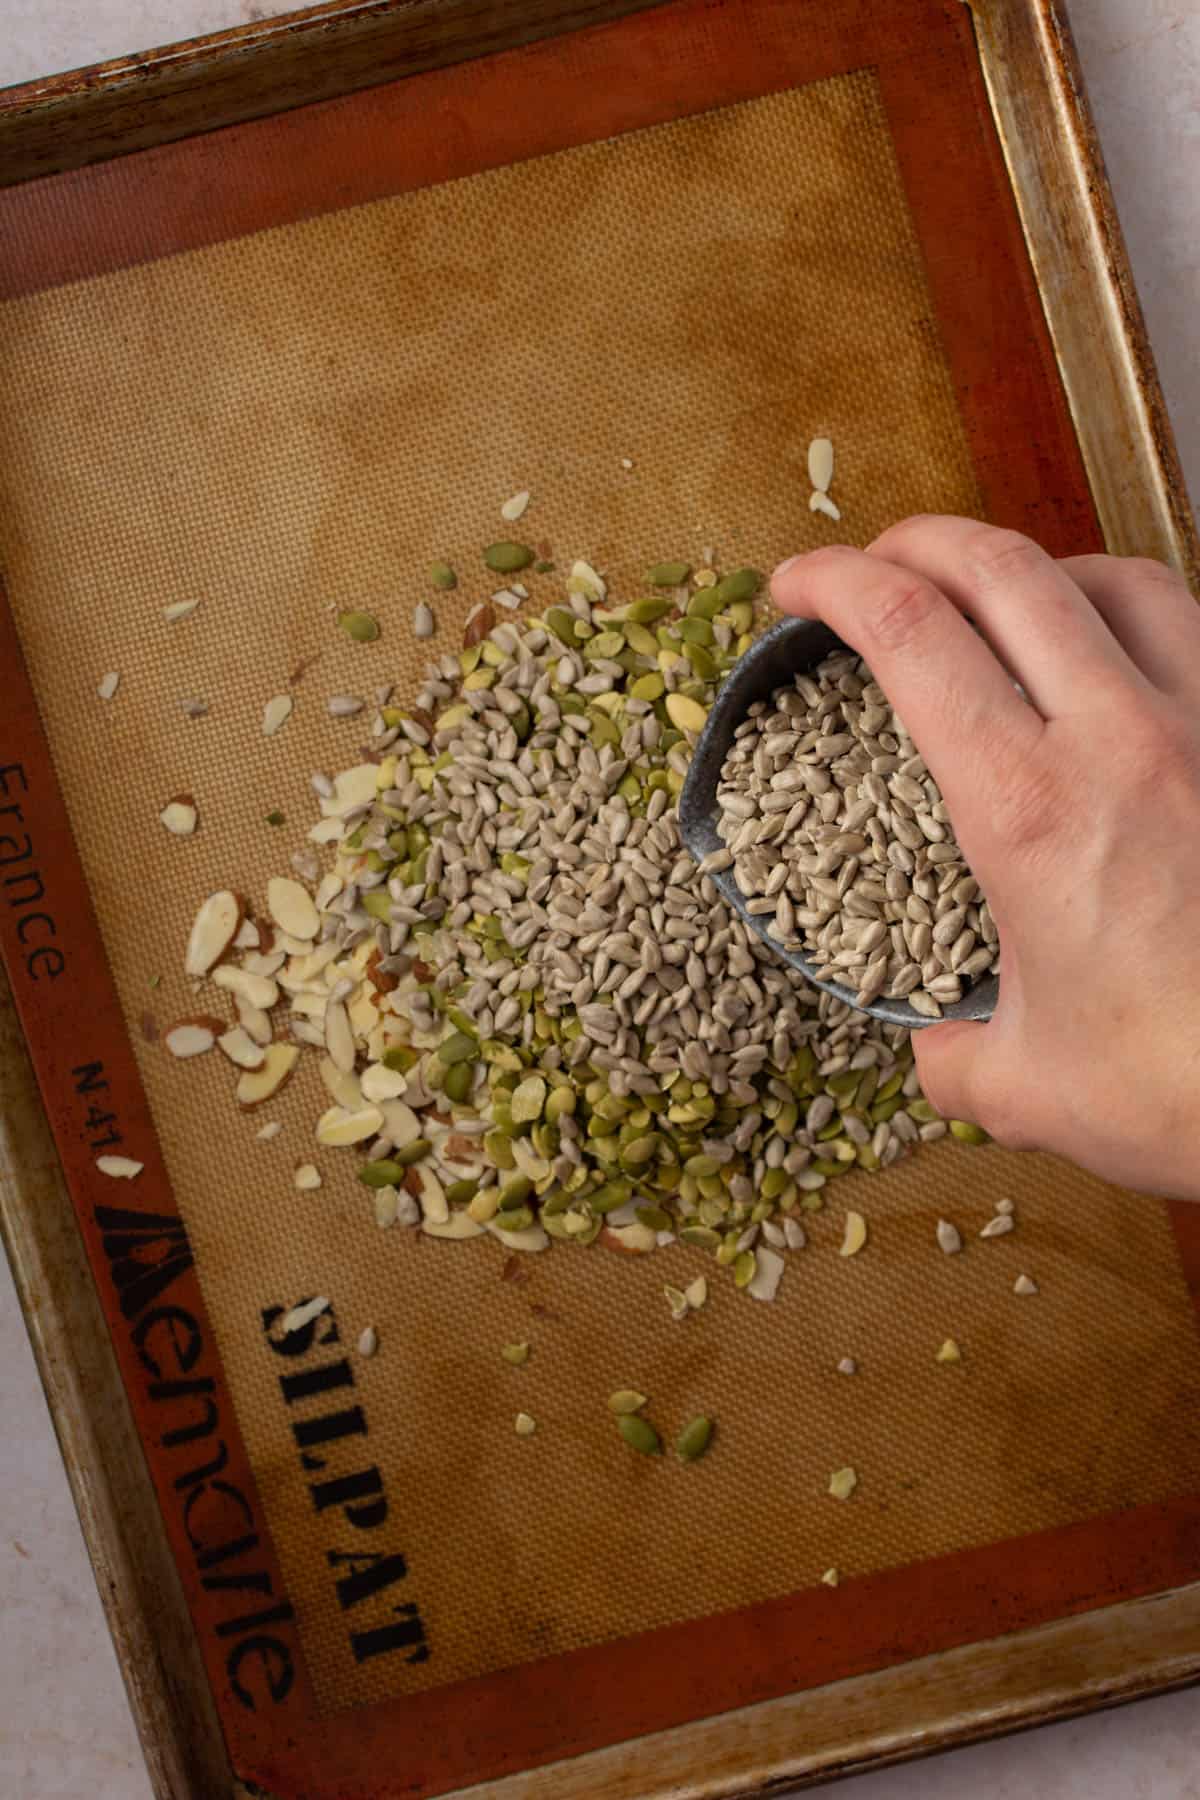 Hand pouring seeds onto cookie sheet.